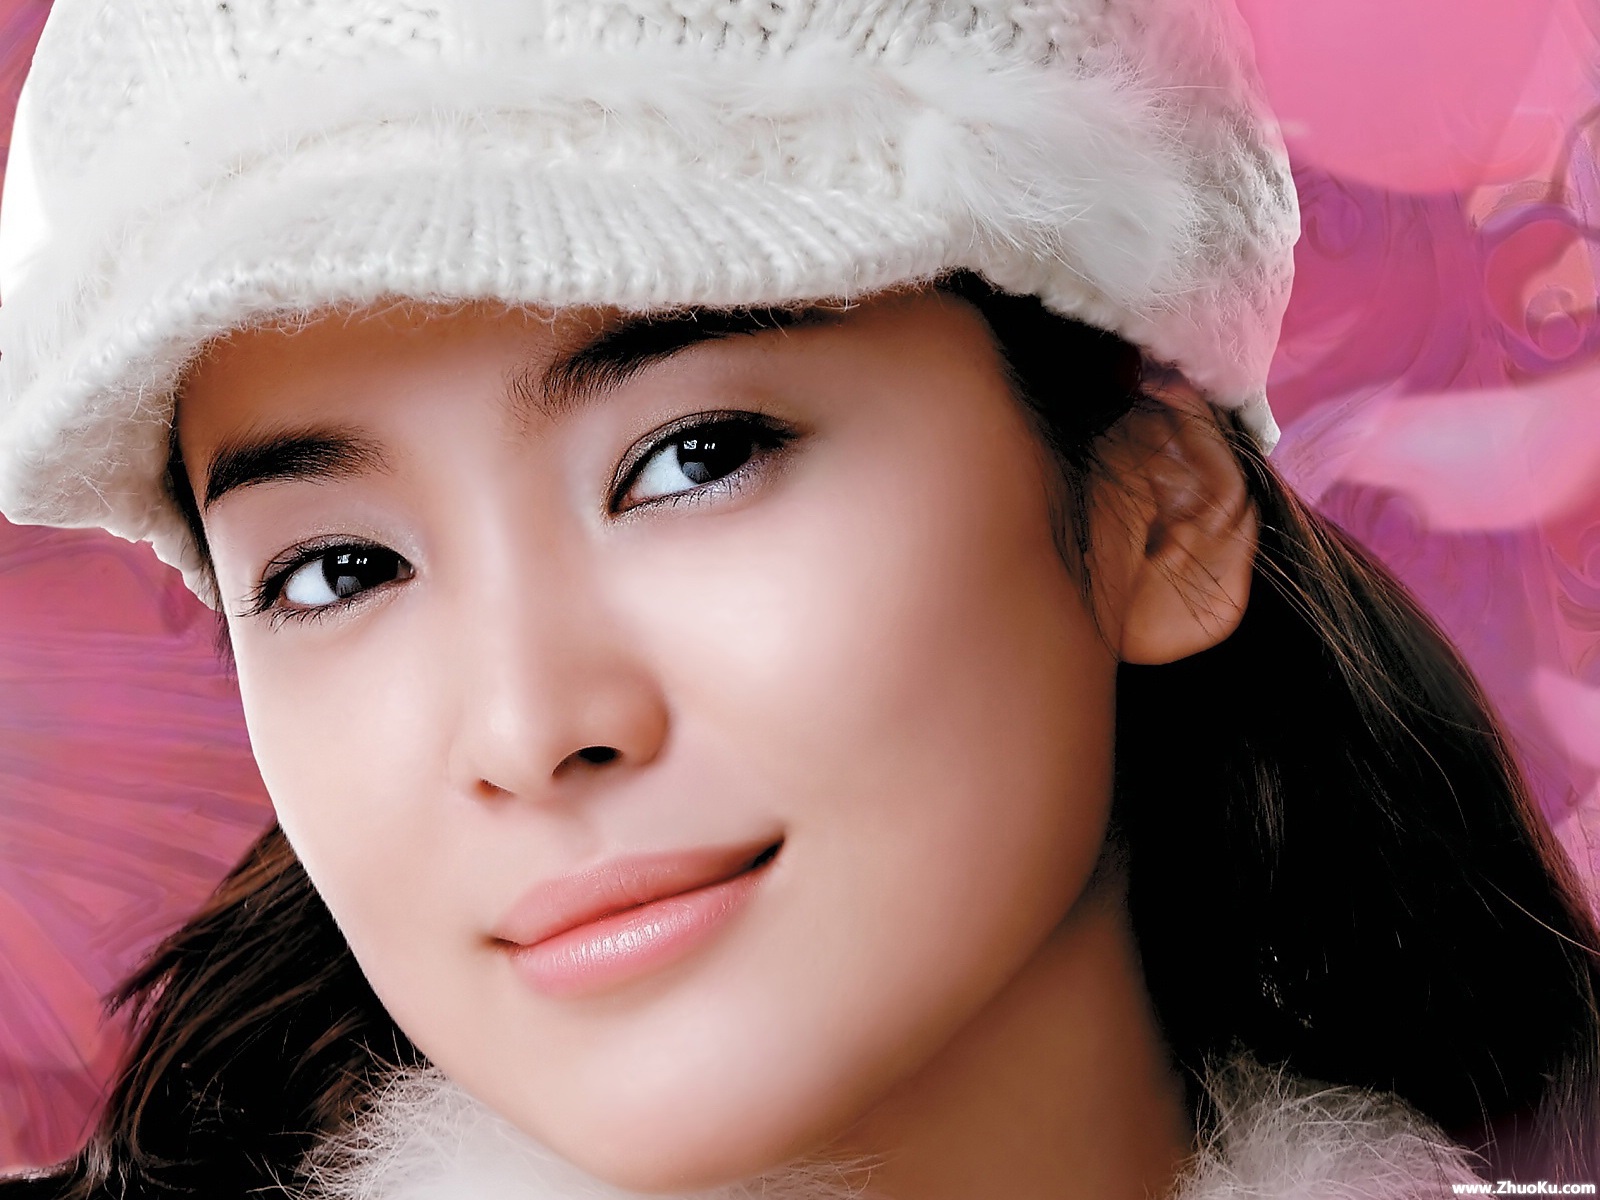 kyo full hd wallpaper 14129 just another high quality new song hye kyo ...